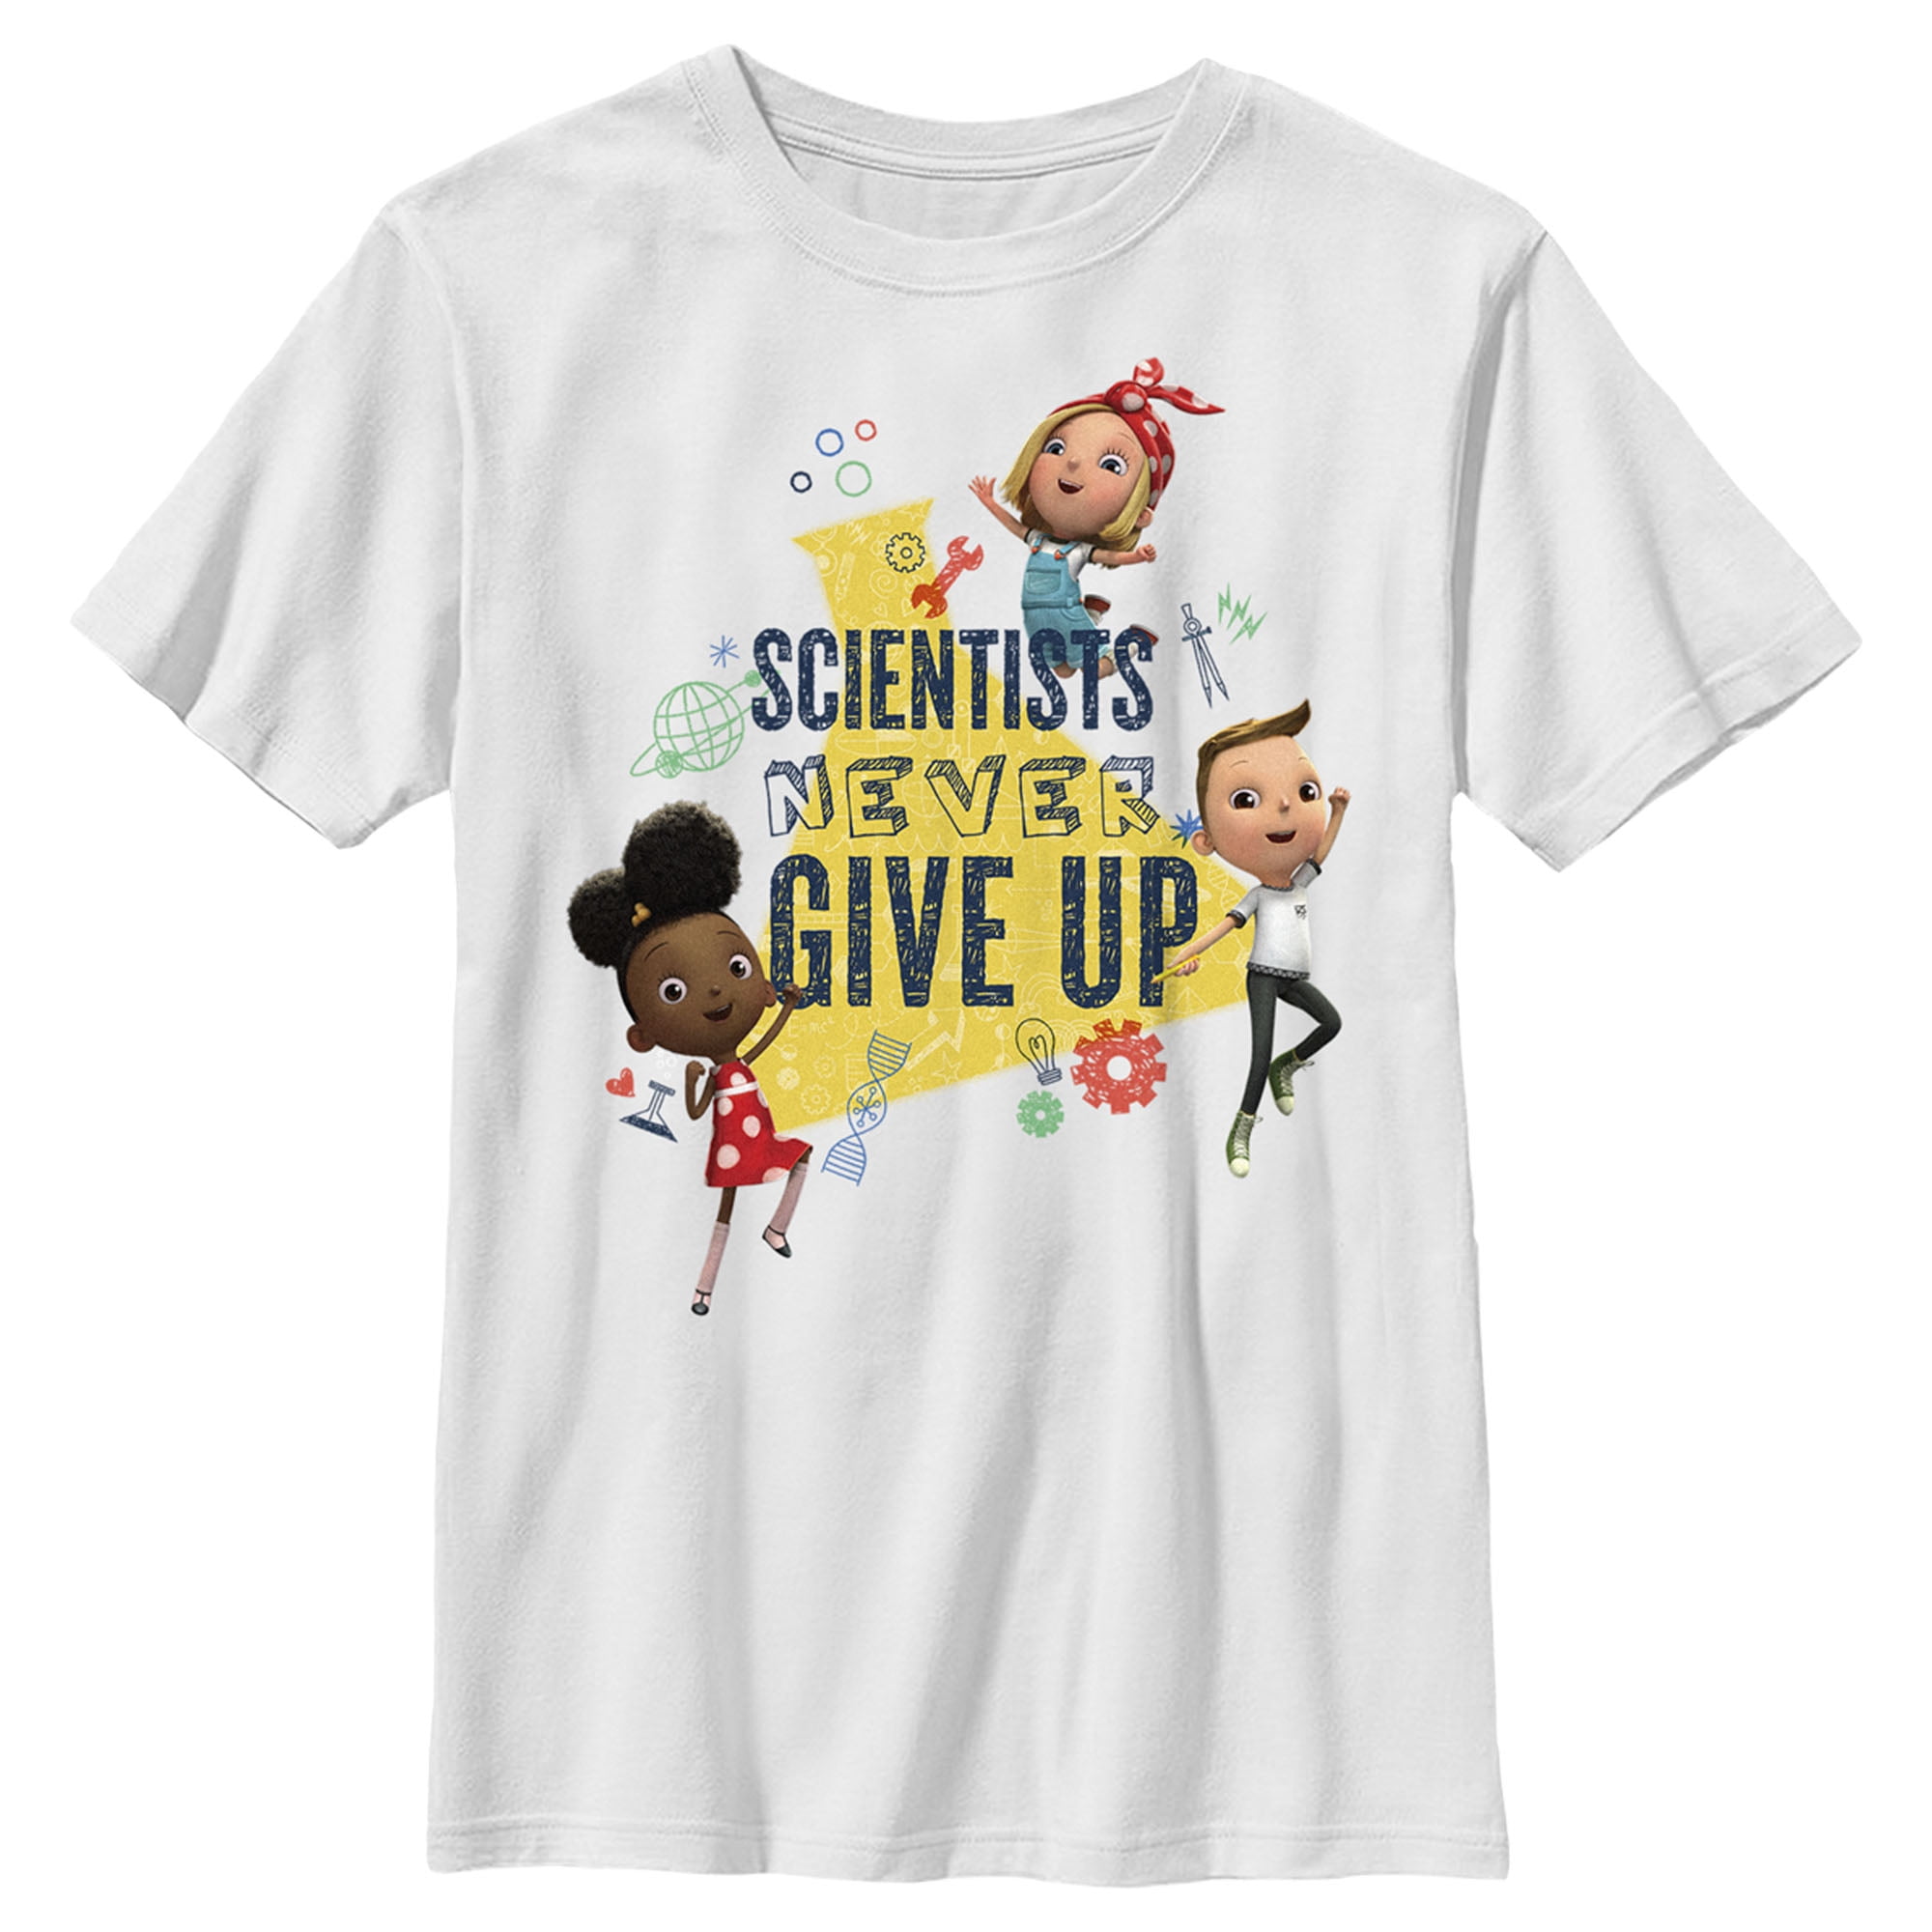 Boy's Ada Twist, Scientist Never Give Up Graphic Tee White Small -  